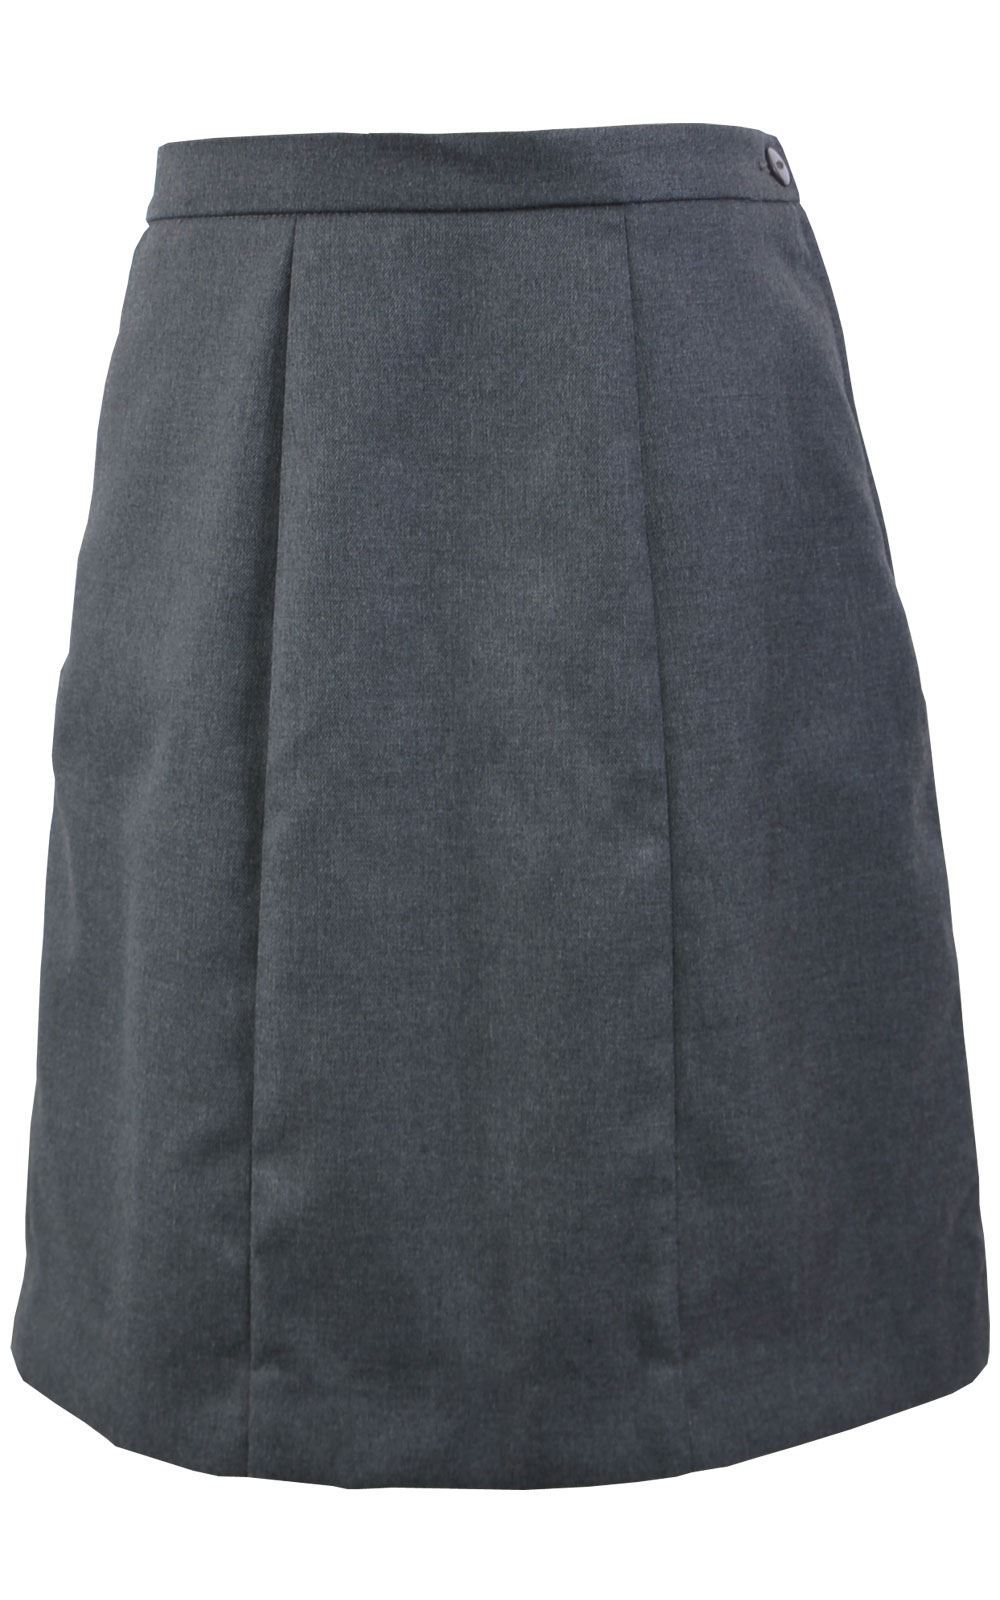 Picture of Grey Skirt S&T 5273